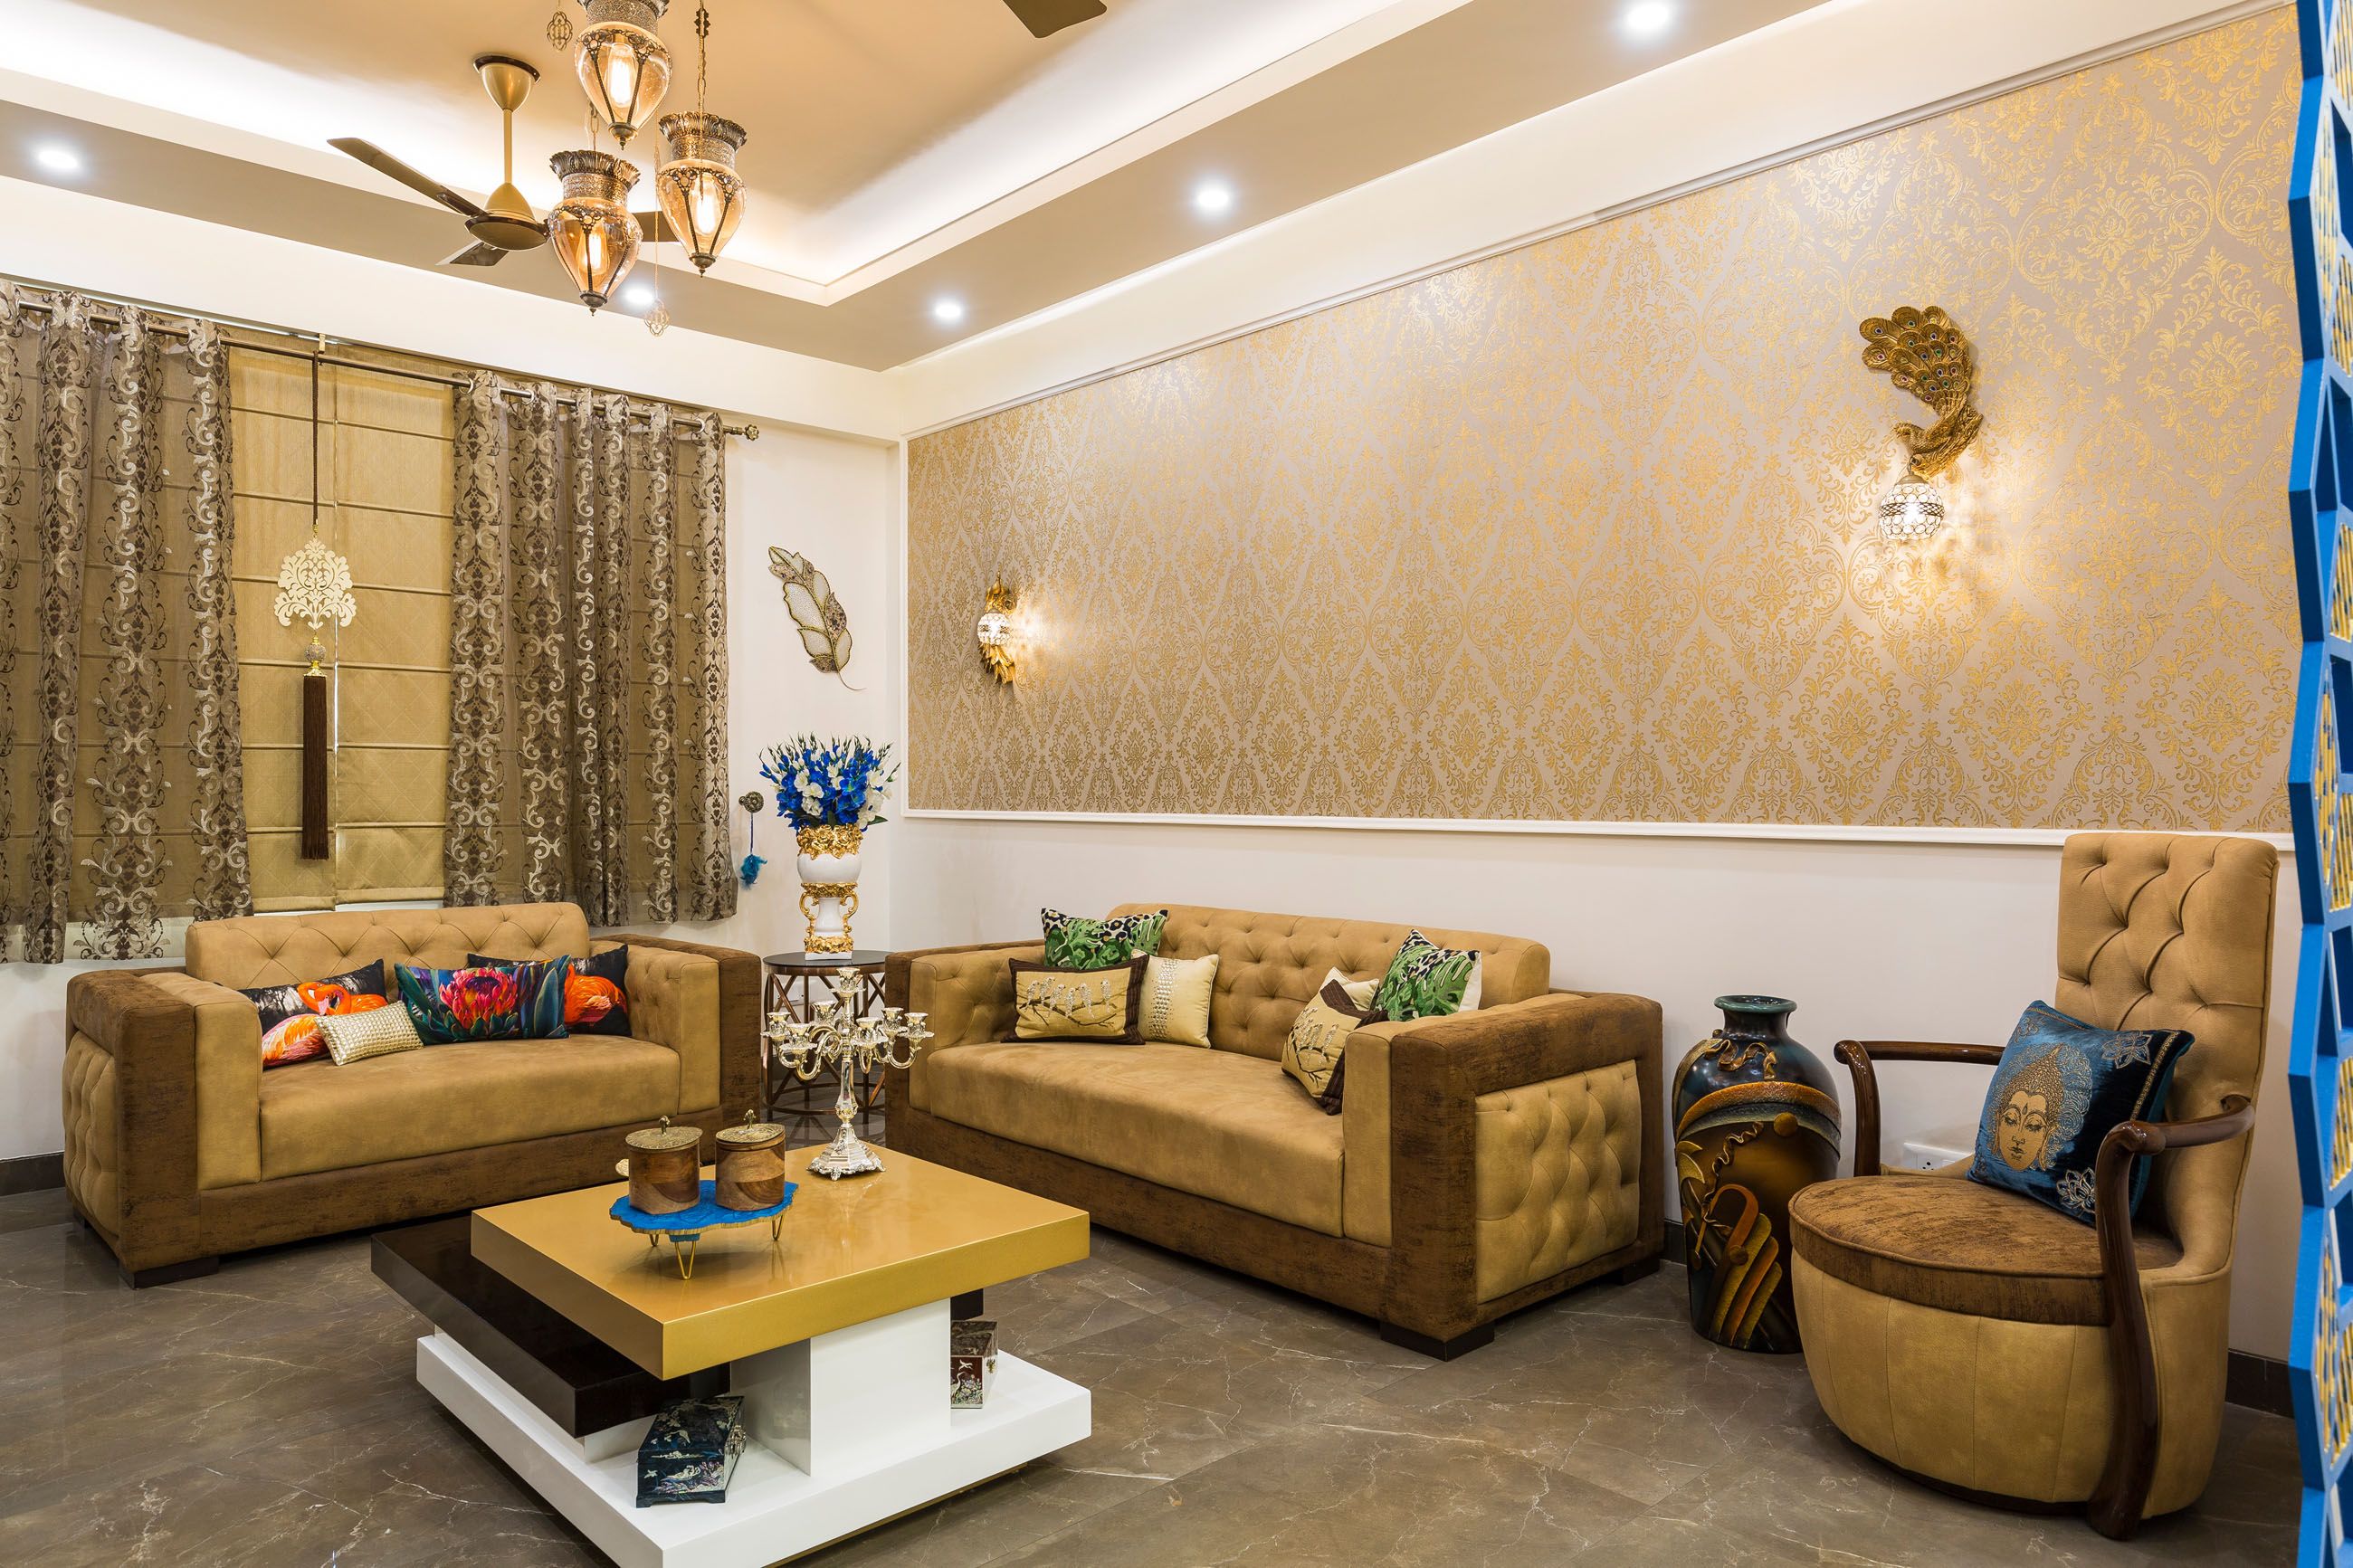 Traditional Gold-Toned Living Room Design With Beige And Brown Sofas And Damask Wallpaper